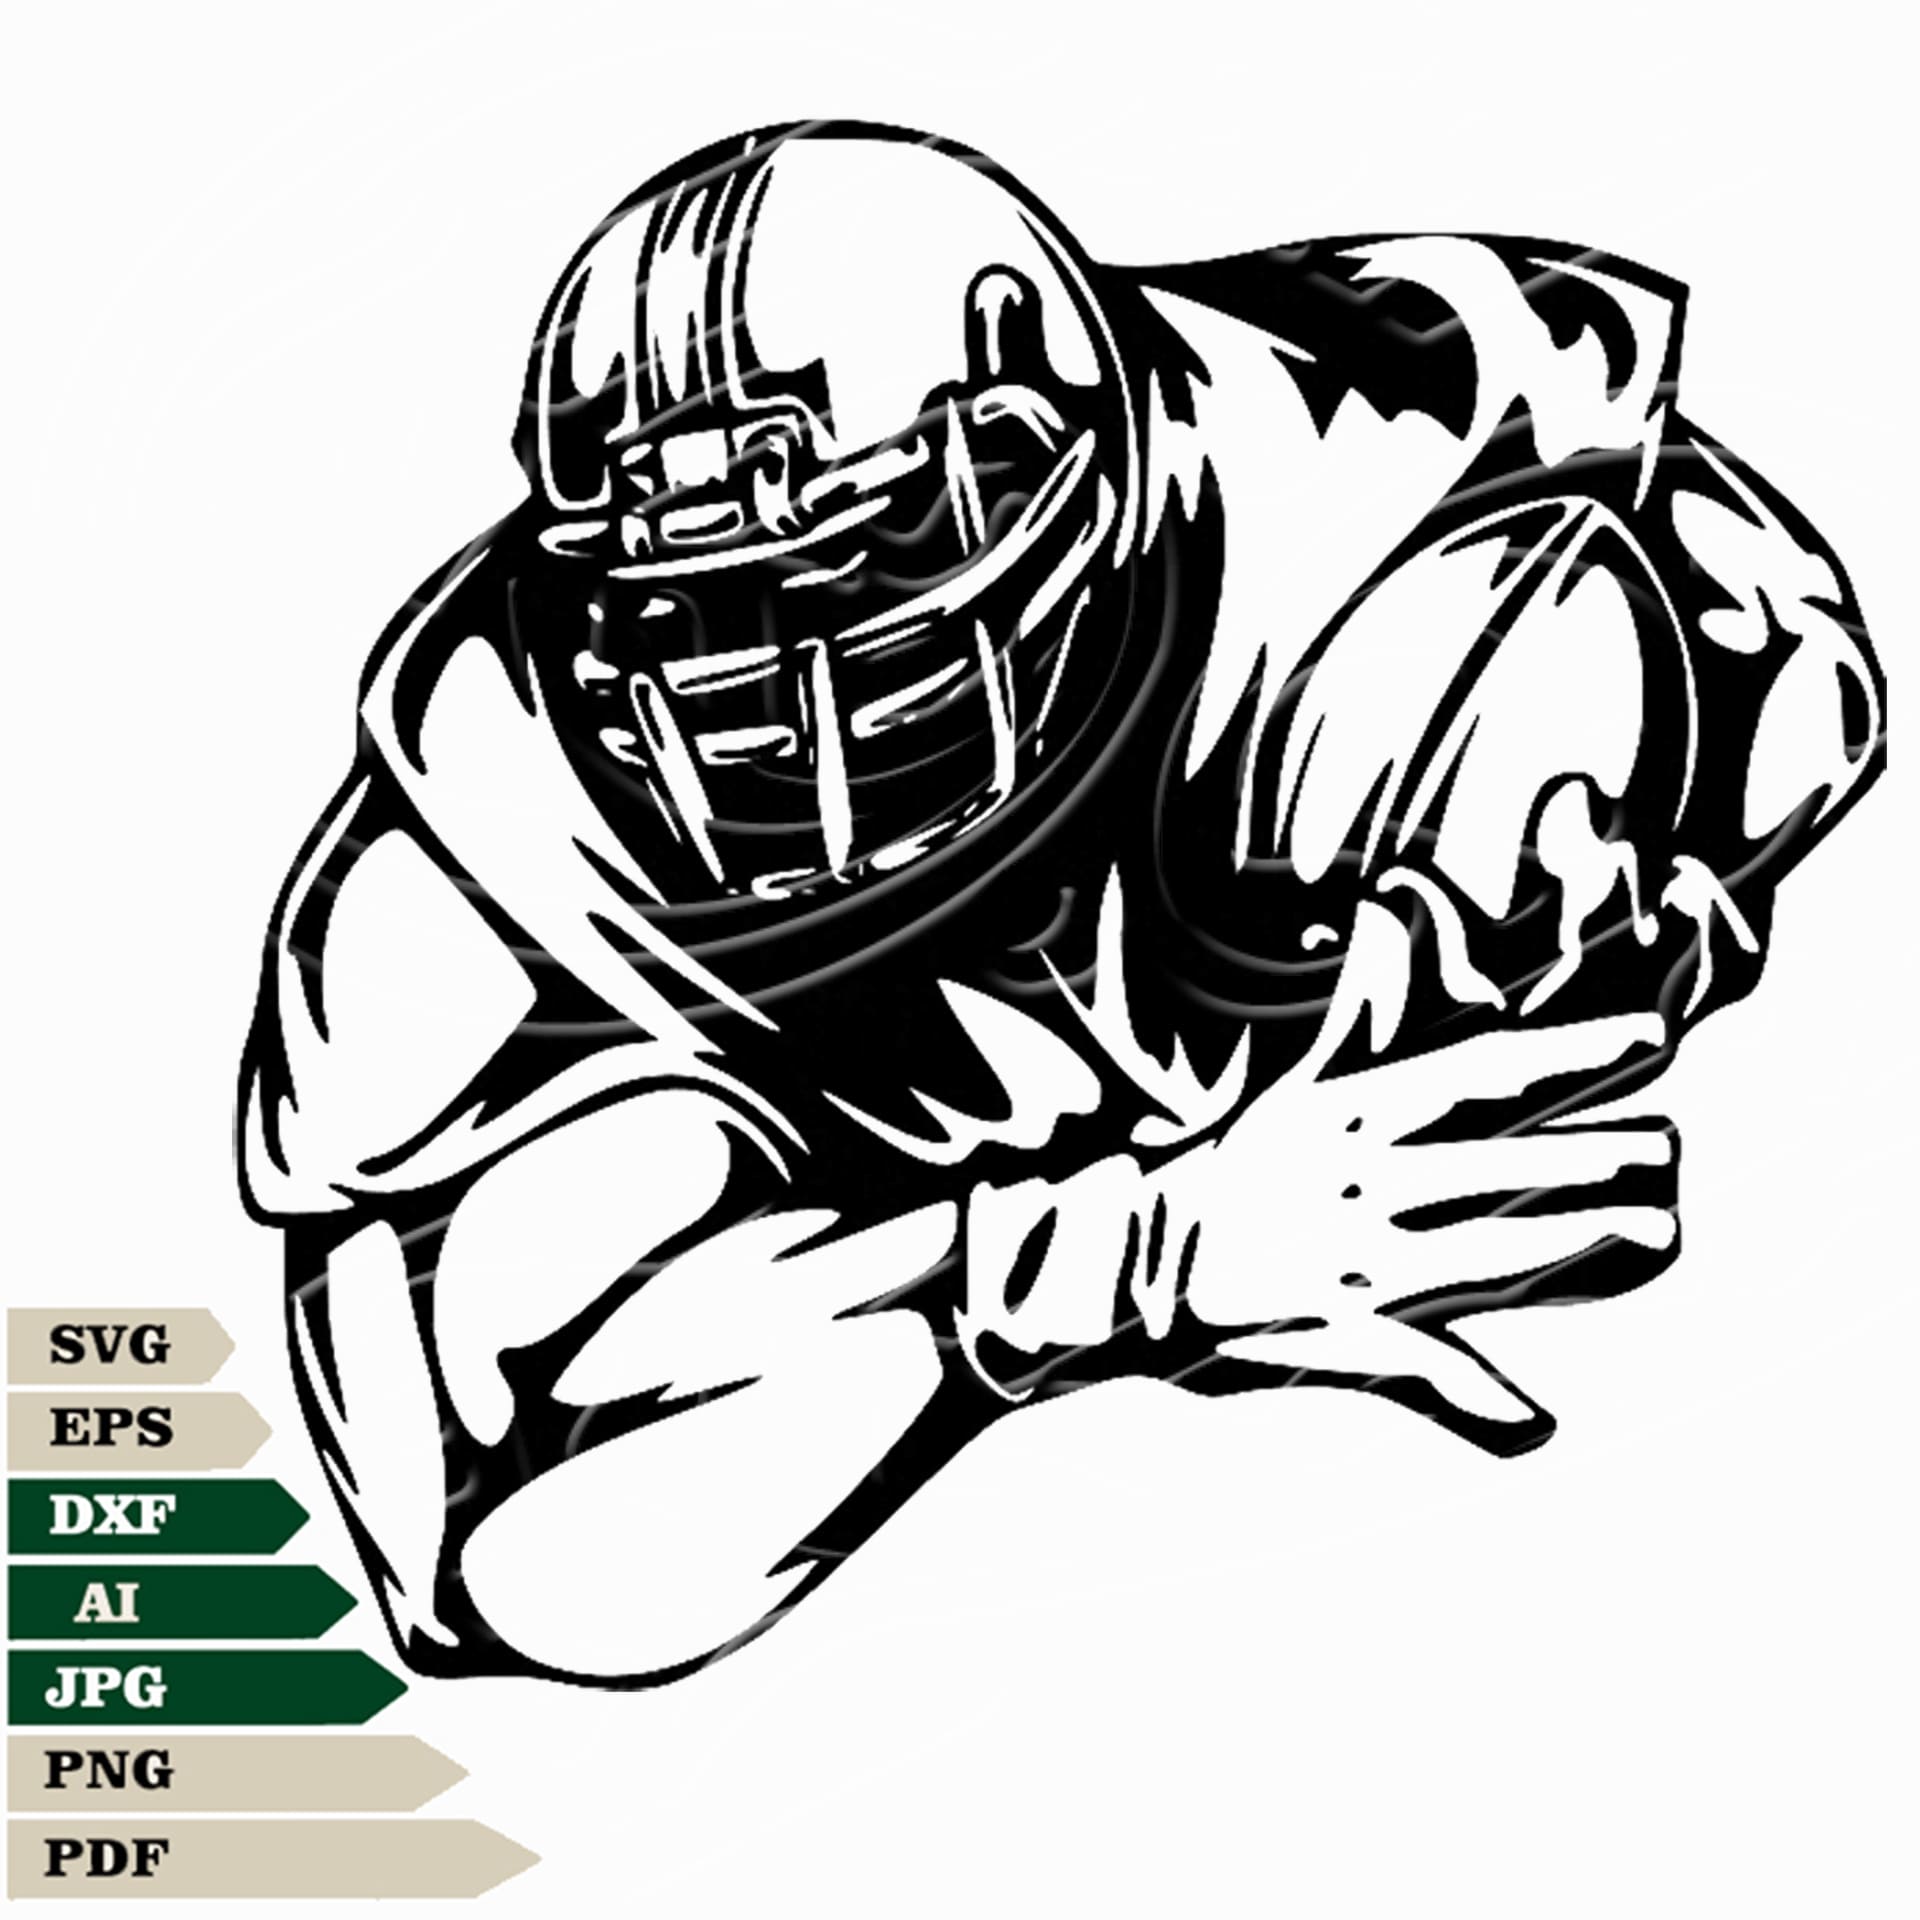 This High-Quality American Football Player Svg File Features Detailed Football Player Svg Design Vector Graphics And Player Png Files For Fuss-Free Use In Cutting And Tattoo Machines. The Football Player Vector Graphics Are Optimized For Both Personal And Commercial Use. Enjoy Experiencing Football Player Svg Design With American Football Player Svg For Tattoo And Player Svg For Cricut.